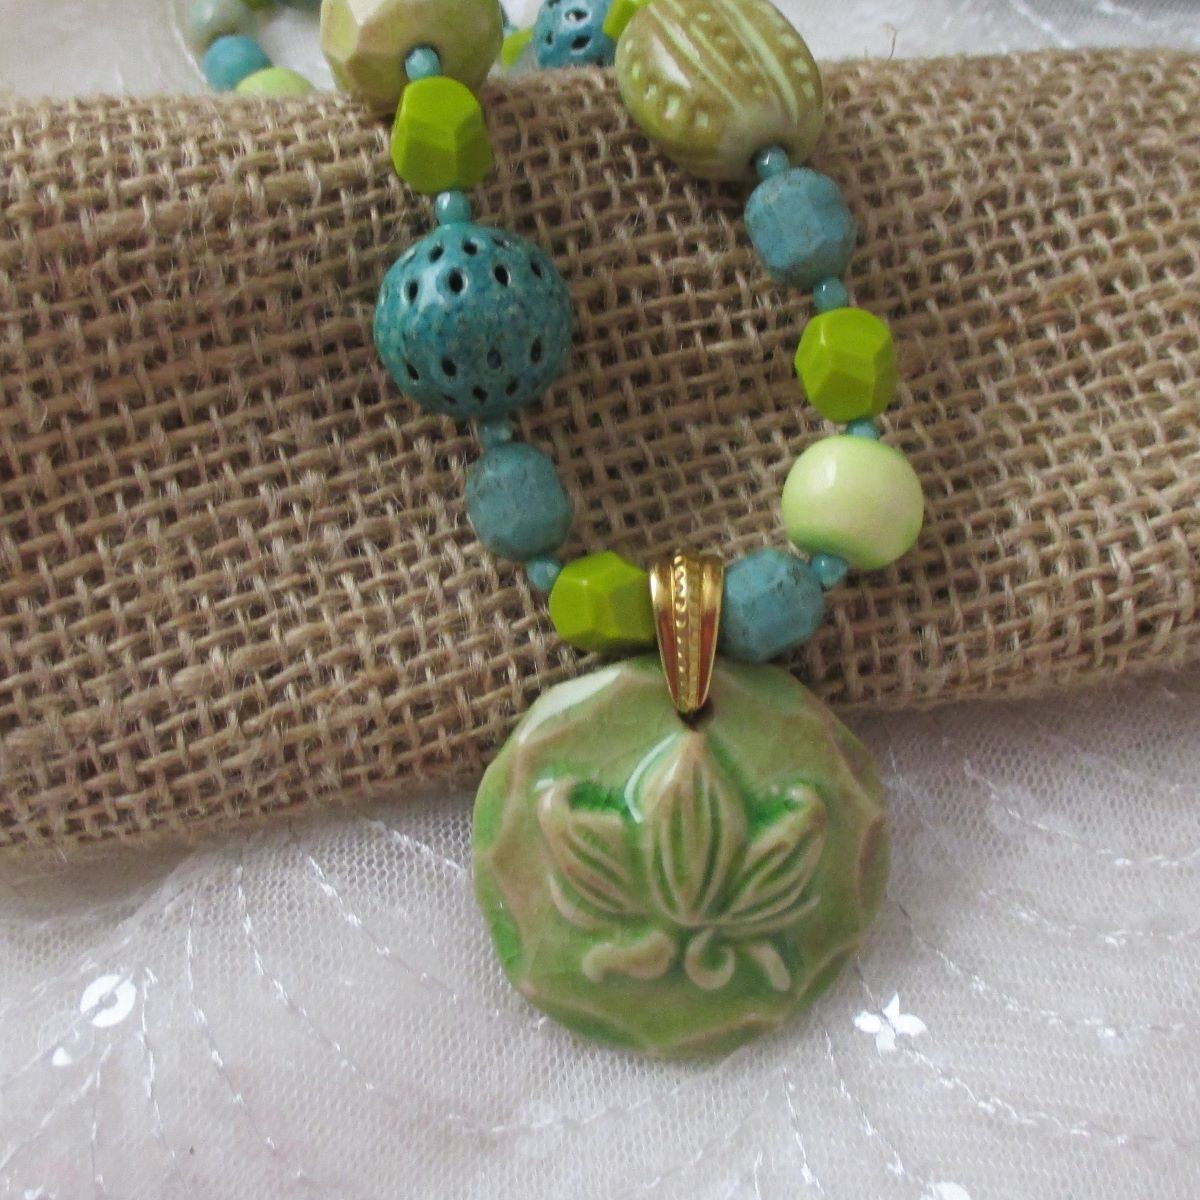 Ceramic Pendant Necklace in Celery and Teal Handmade Ceramic Beads - VP's Jewelry 